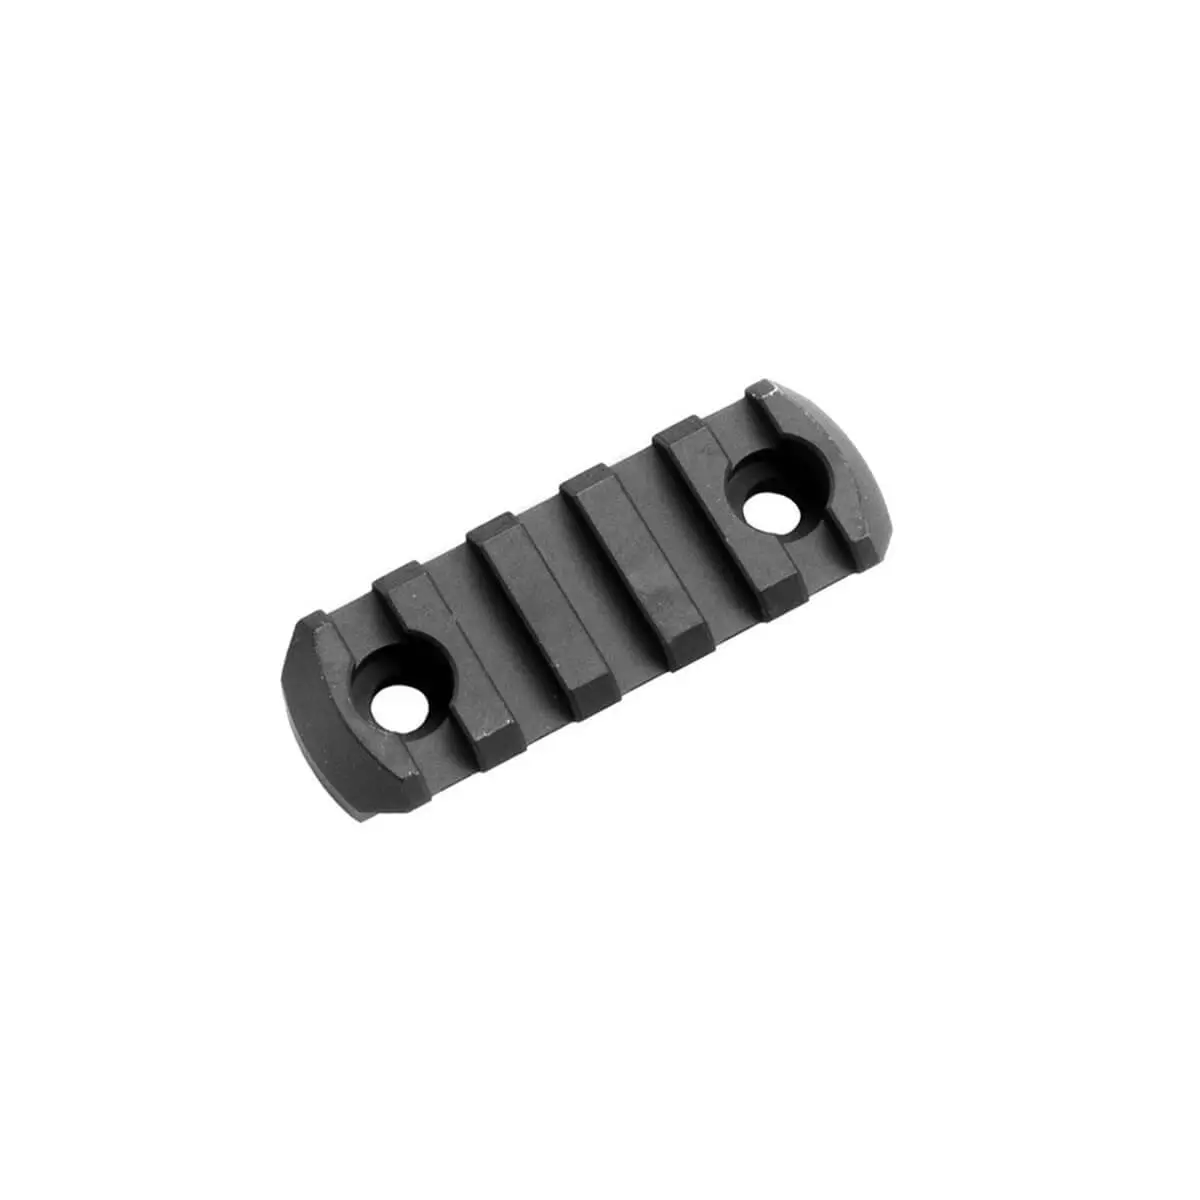 Magpul Aluminum Picatinny Rail Section for M-LOK – 4 Lengths – 3, 5, 7, or 9 Slot